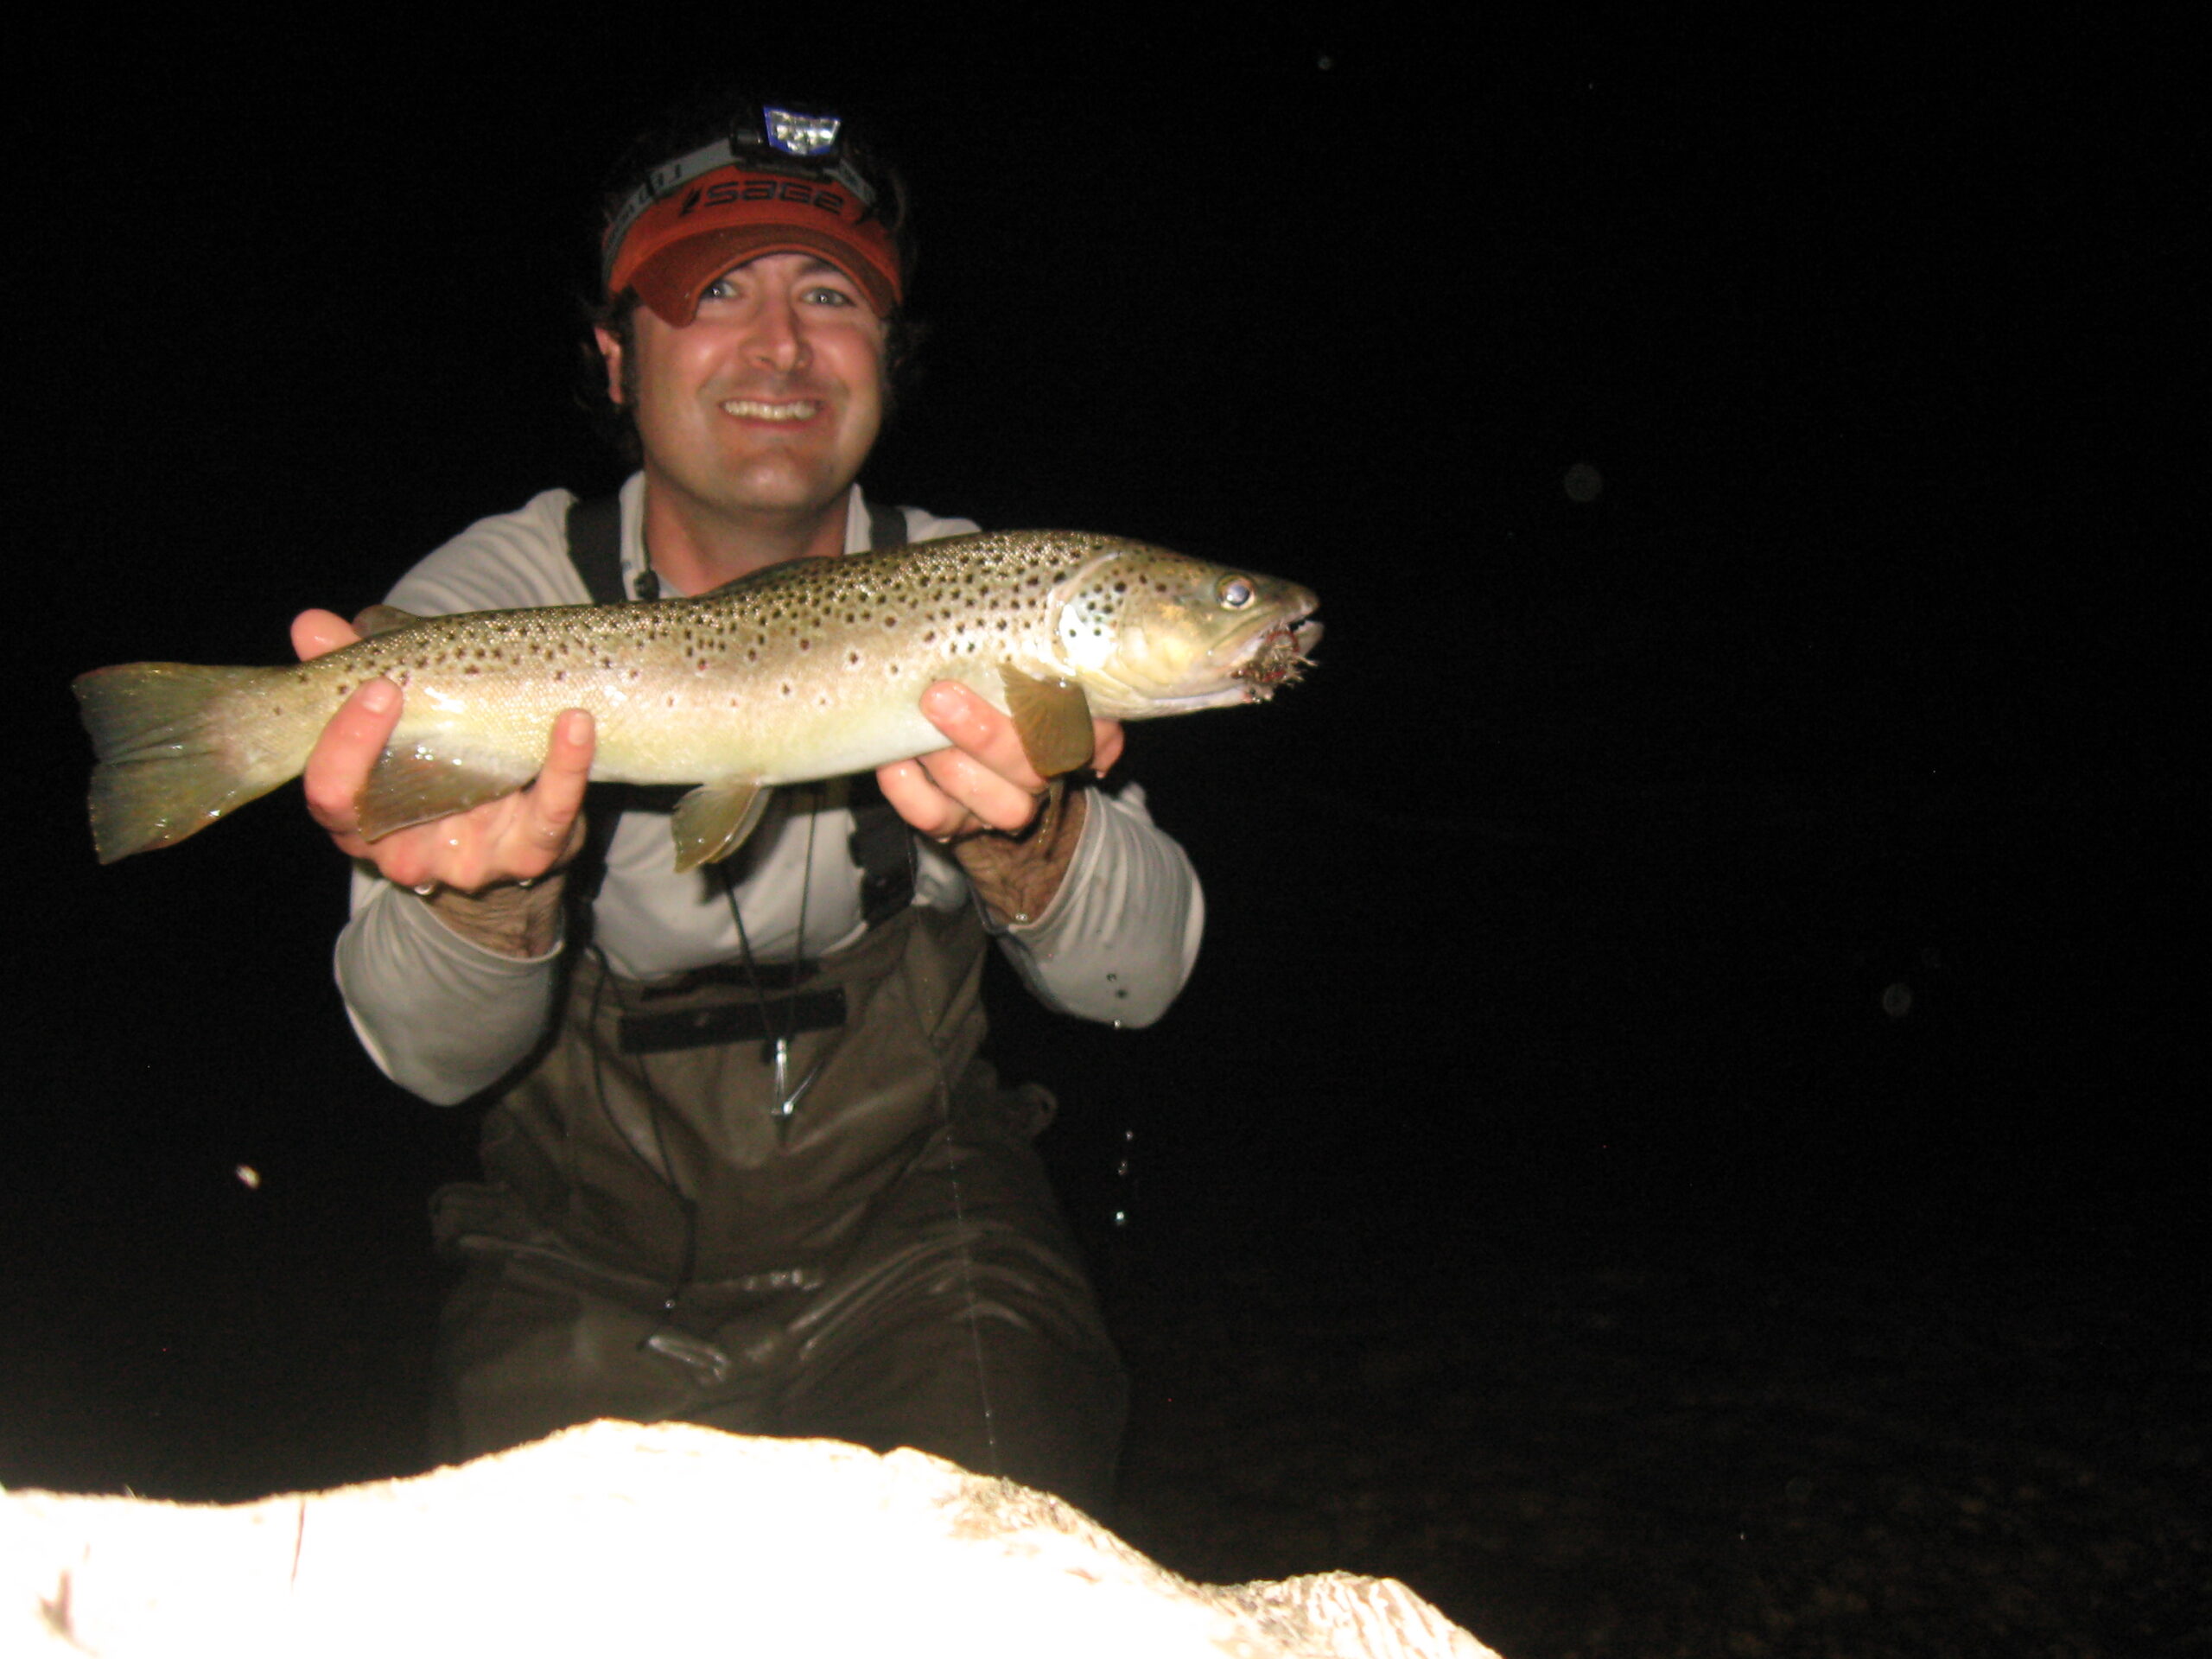 Brown trout caught on a mouse fly at night